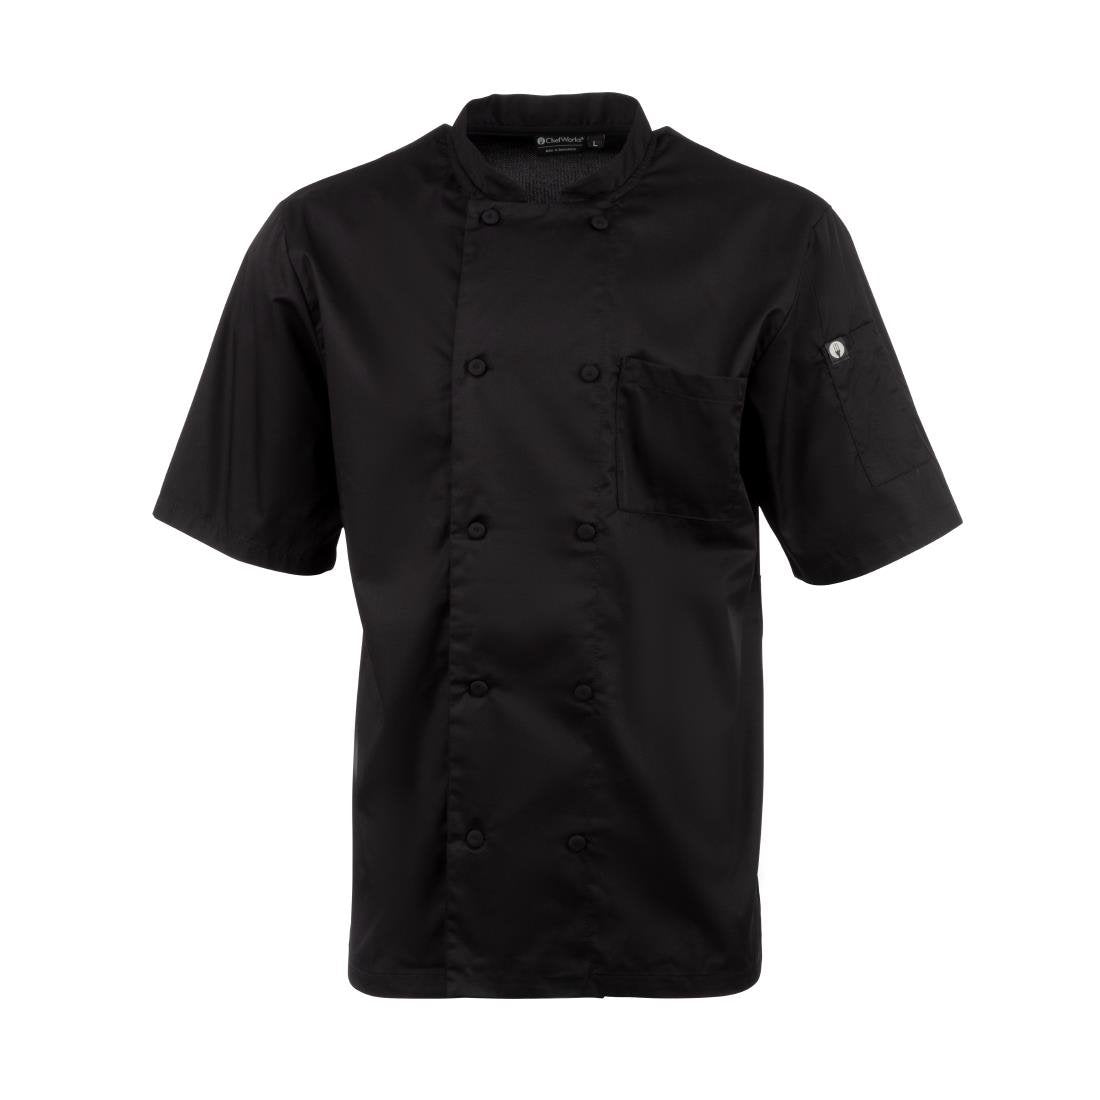 B054-XS Chefs Works Montreal Cool Vent Unisex Short Sleeve Chefs Jacket Black XS